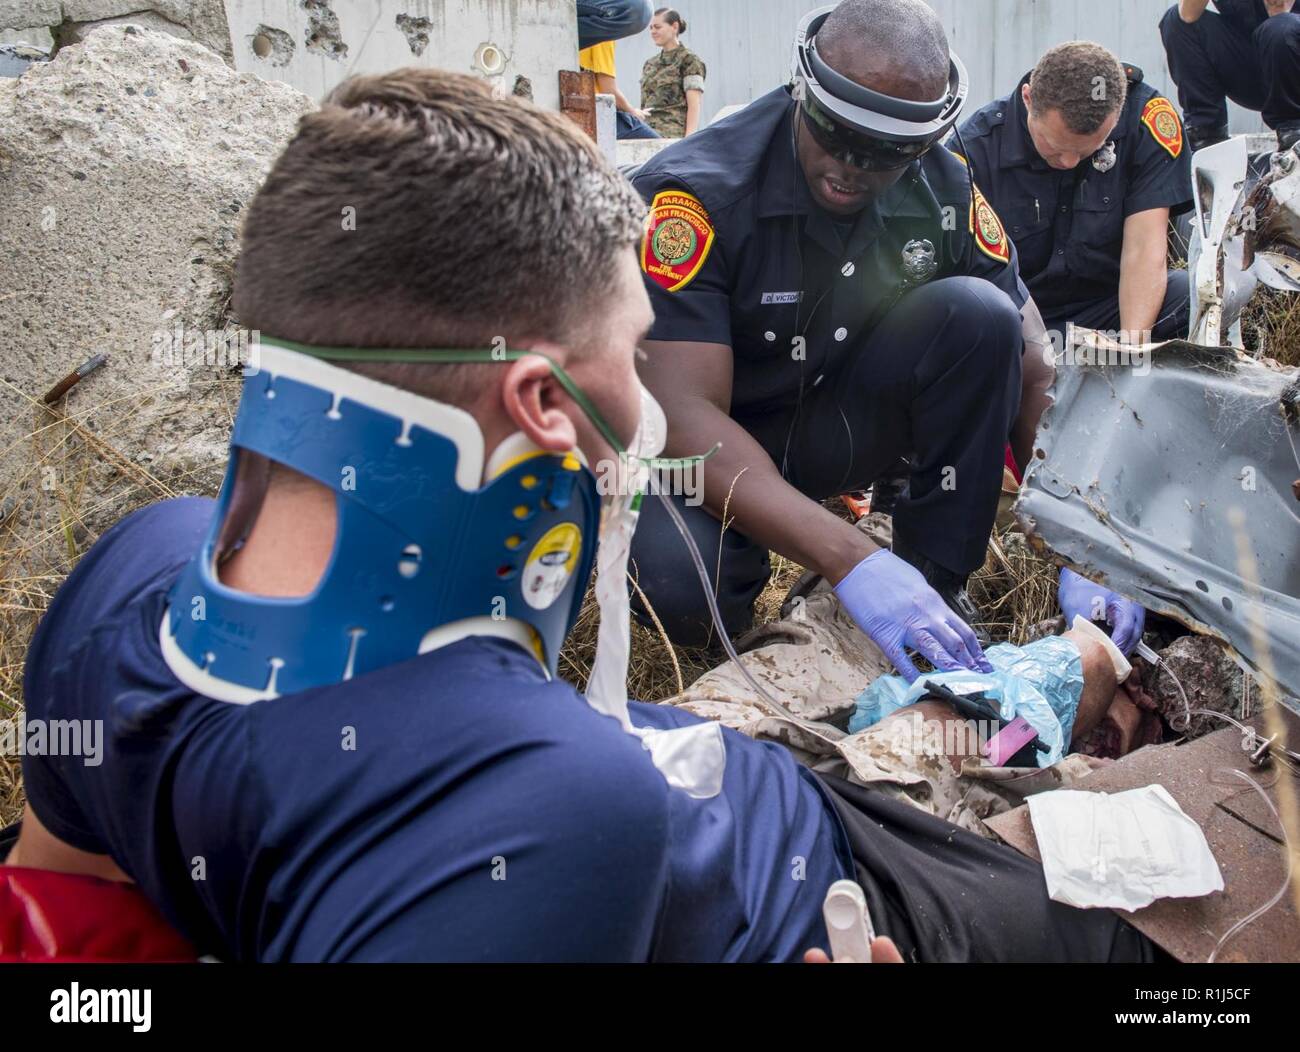 SAN FRANCISCO (Oct. 3, 2018) Damon Victor (right), a paramedic assigned to the San Francisco Fire Department, holds pressure on the amputation site of a simulated patient’s leg while using augmented reality glasses to update a doctor in San Diego about the mock patient’s status as part of a tele-medical training exercise during San Francisco Fleet Week (SFFW) 2018. SFFW is an opportunity for the American public to meet their Navy, Marine Corps and Coast Guard teams and experience America's sea services. During fleet week, service members participate in various community service events, showcas Stock Photo